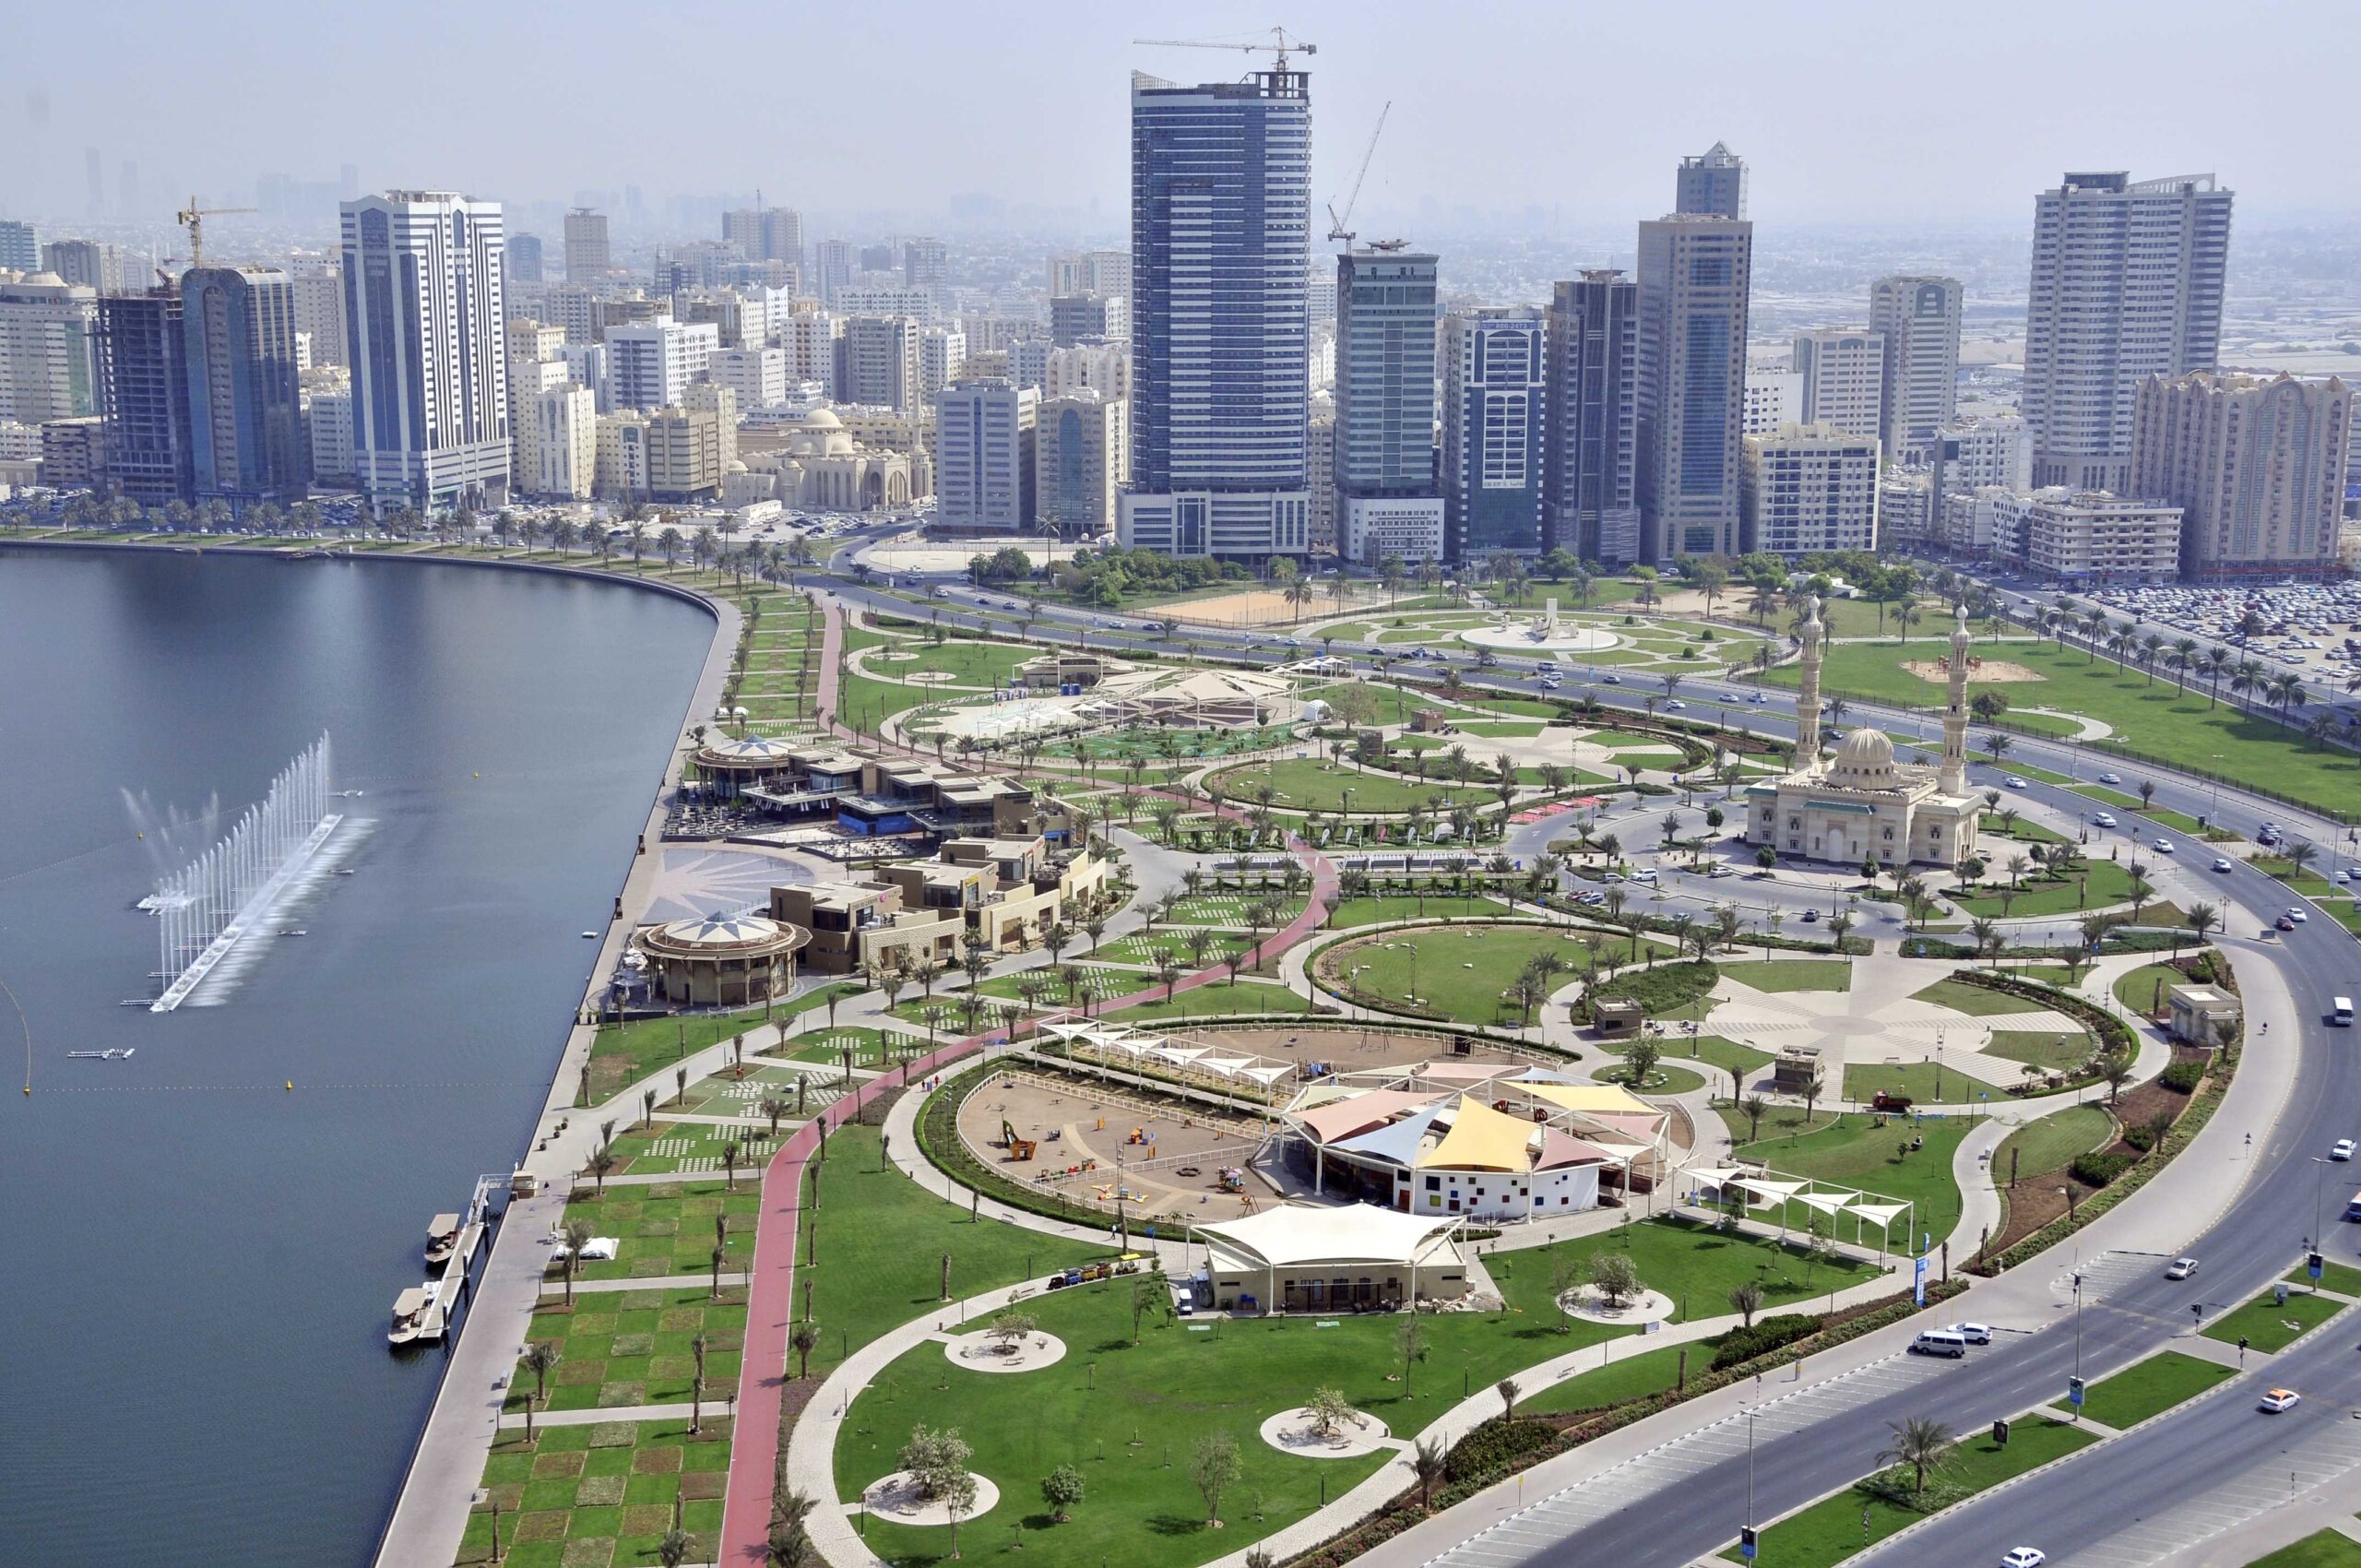 Sharjah: It’s the one big plus for UAE property